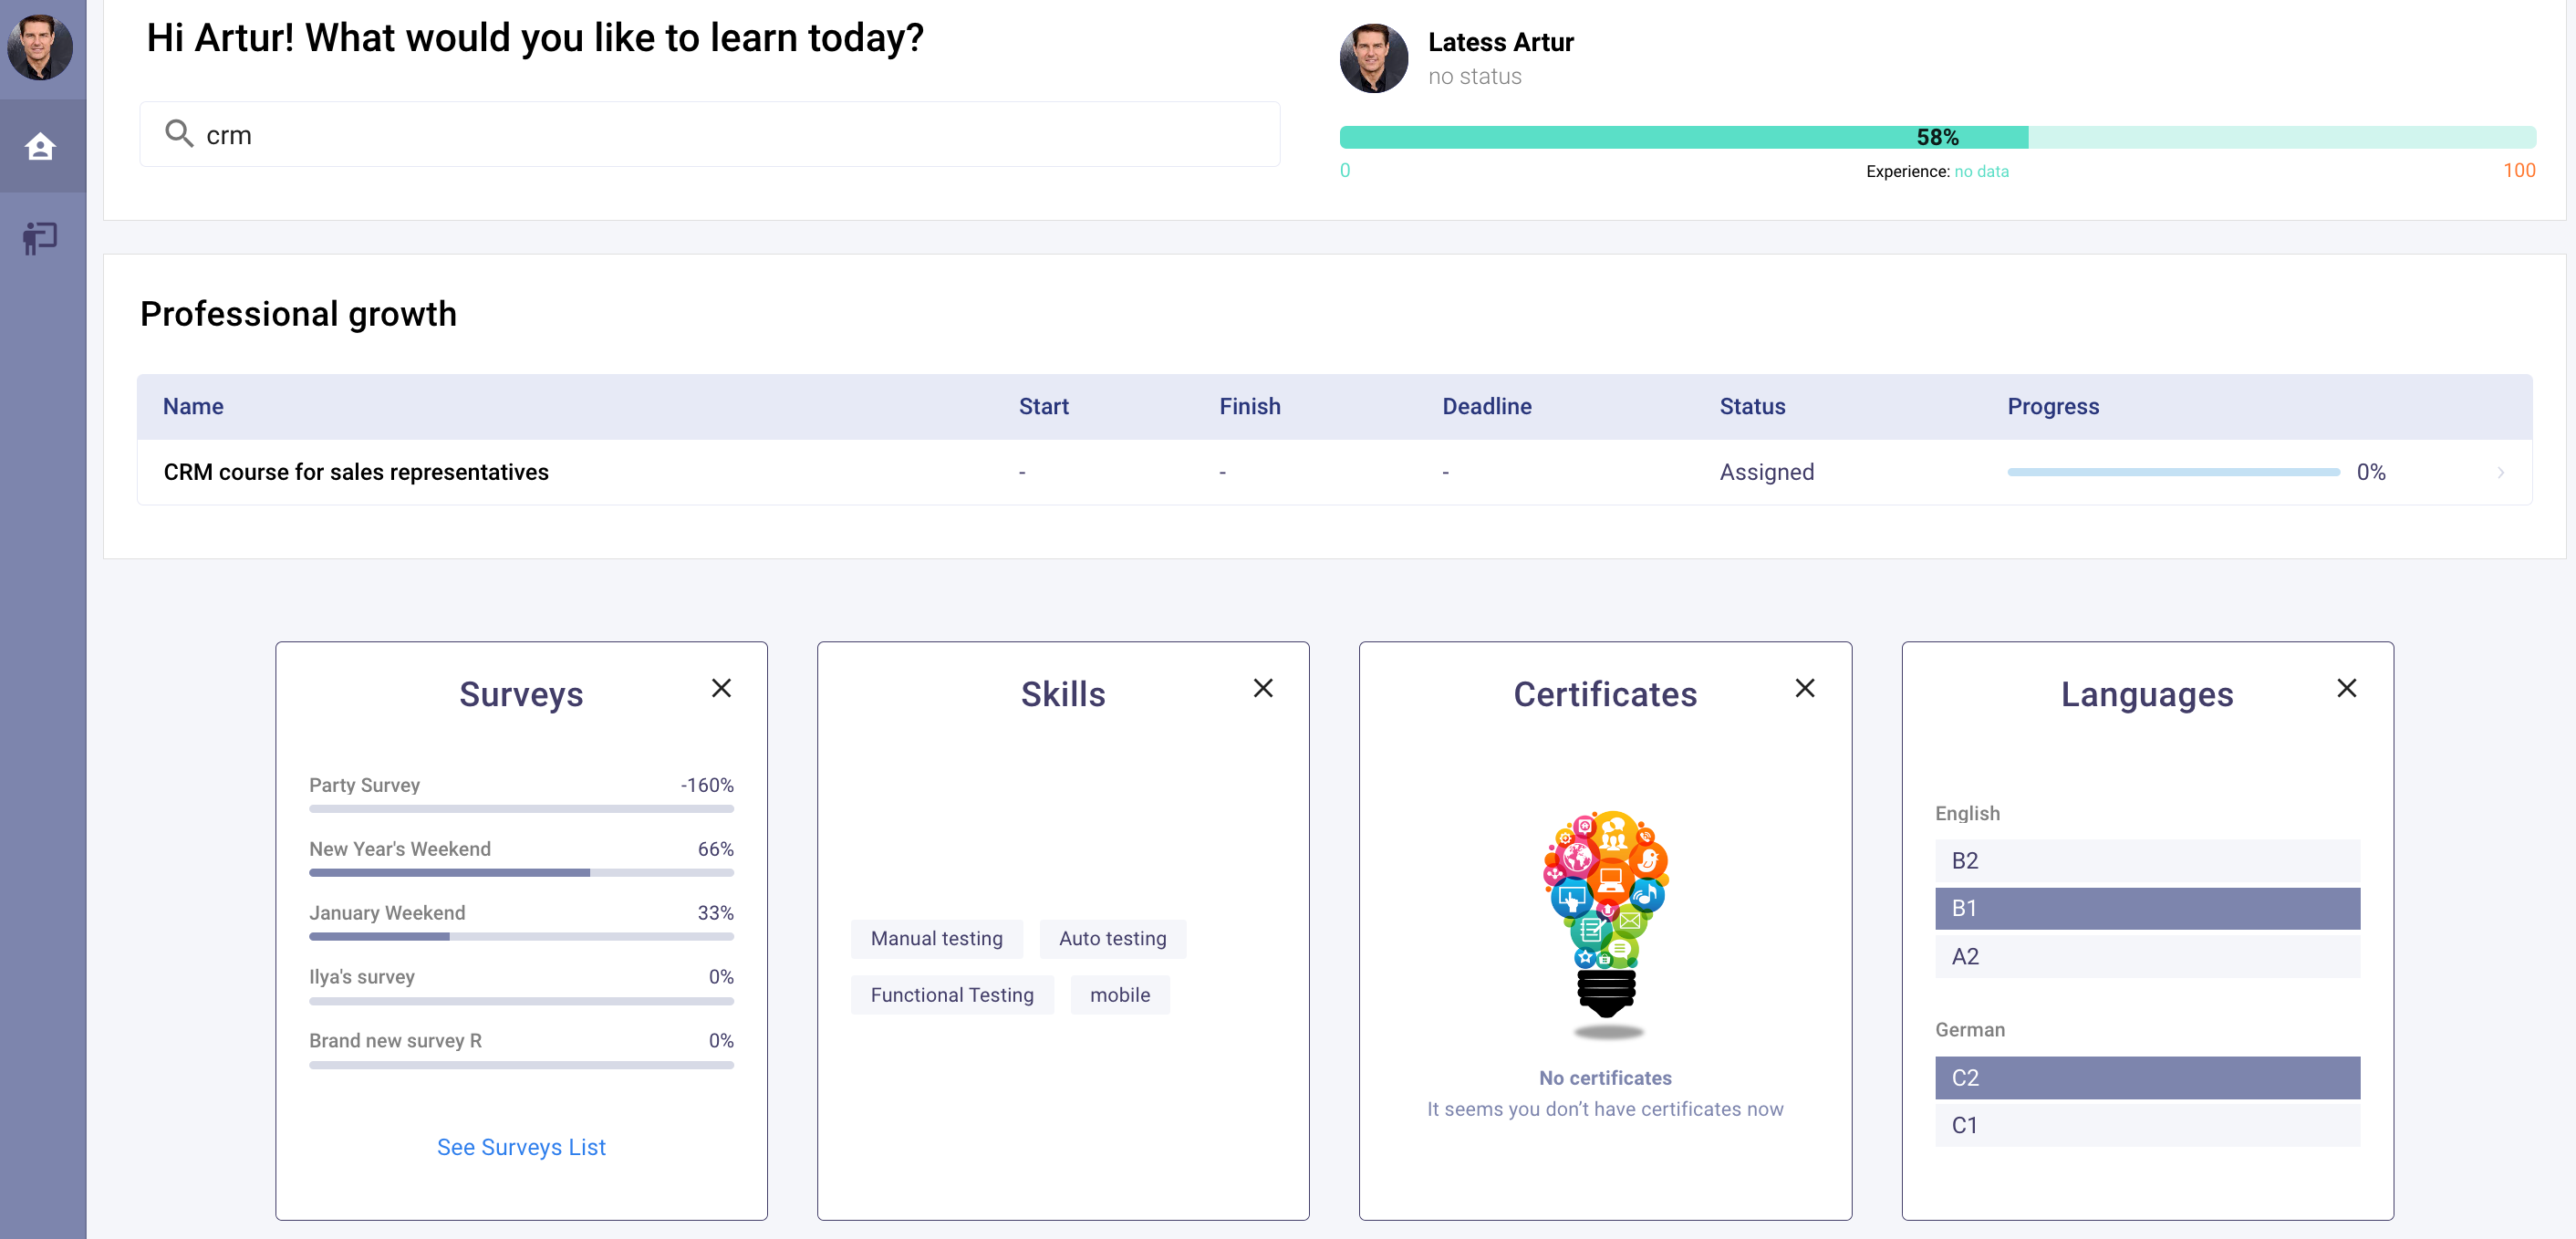 An example of an employee dashboard with information about mastered skills, current learning paths, and experience level. Based on the revealed skill gap (58% out of 100% expertise) we see a CRM course assigned by the head of the department for closing the skills gap